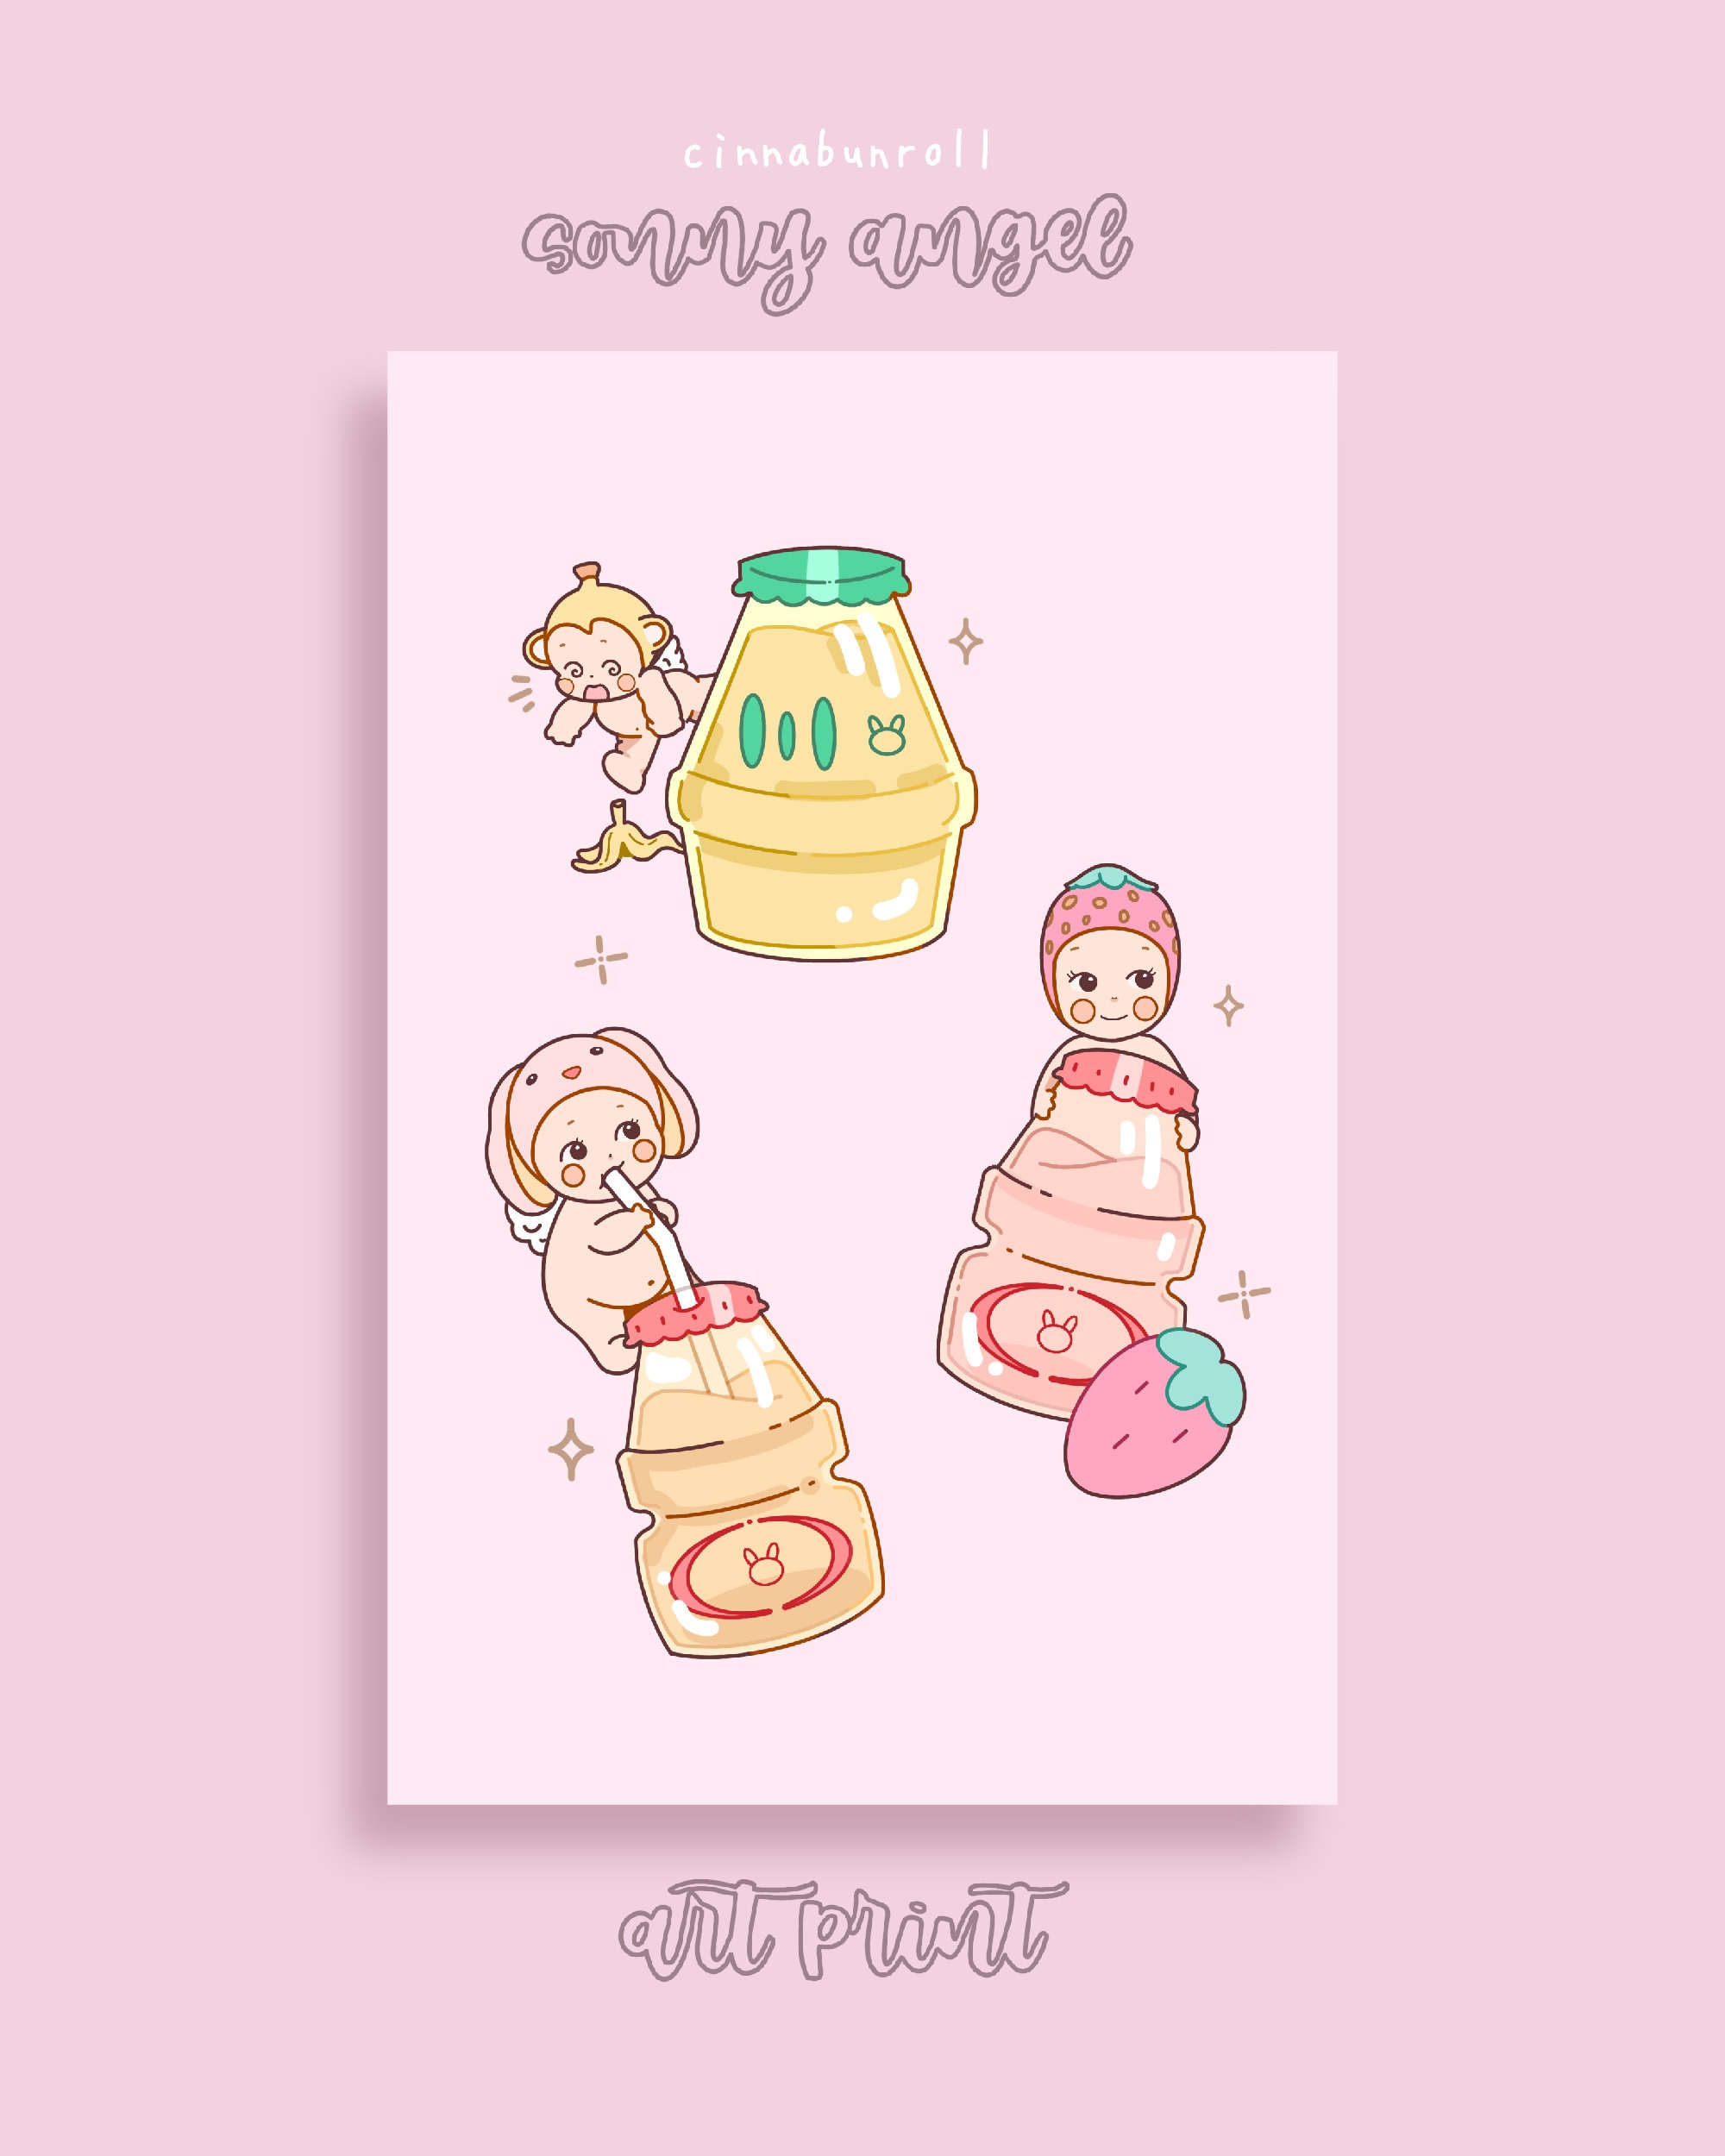 Sonny Angel Stickers (Ver. 1) – kyoongie